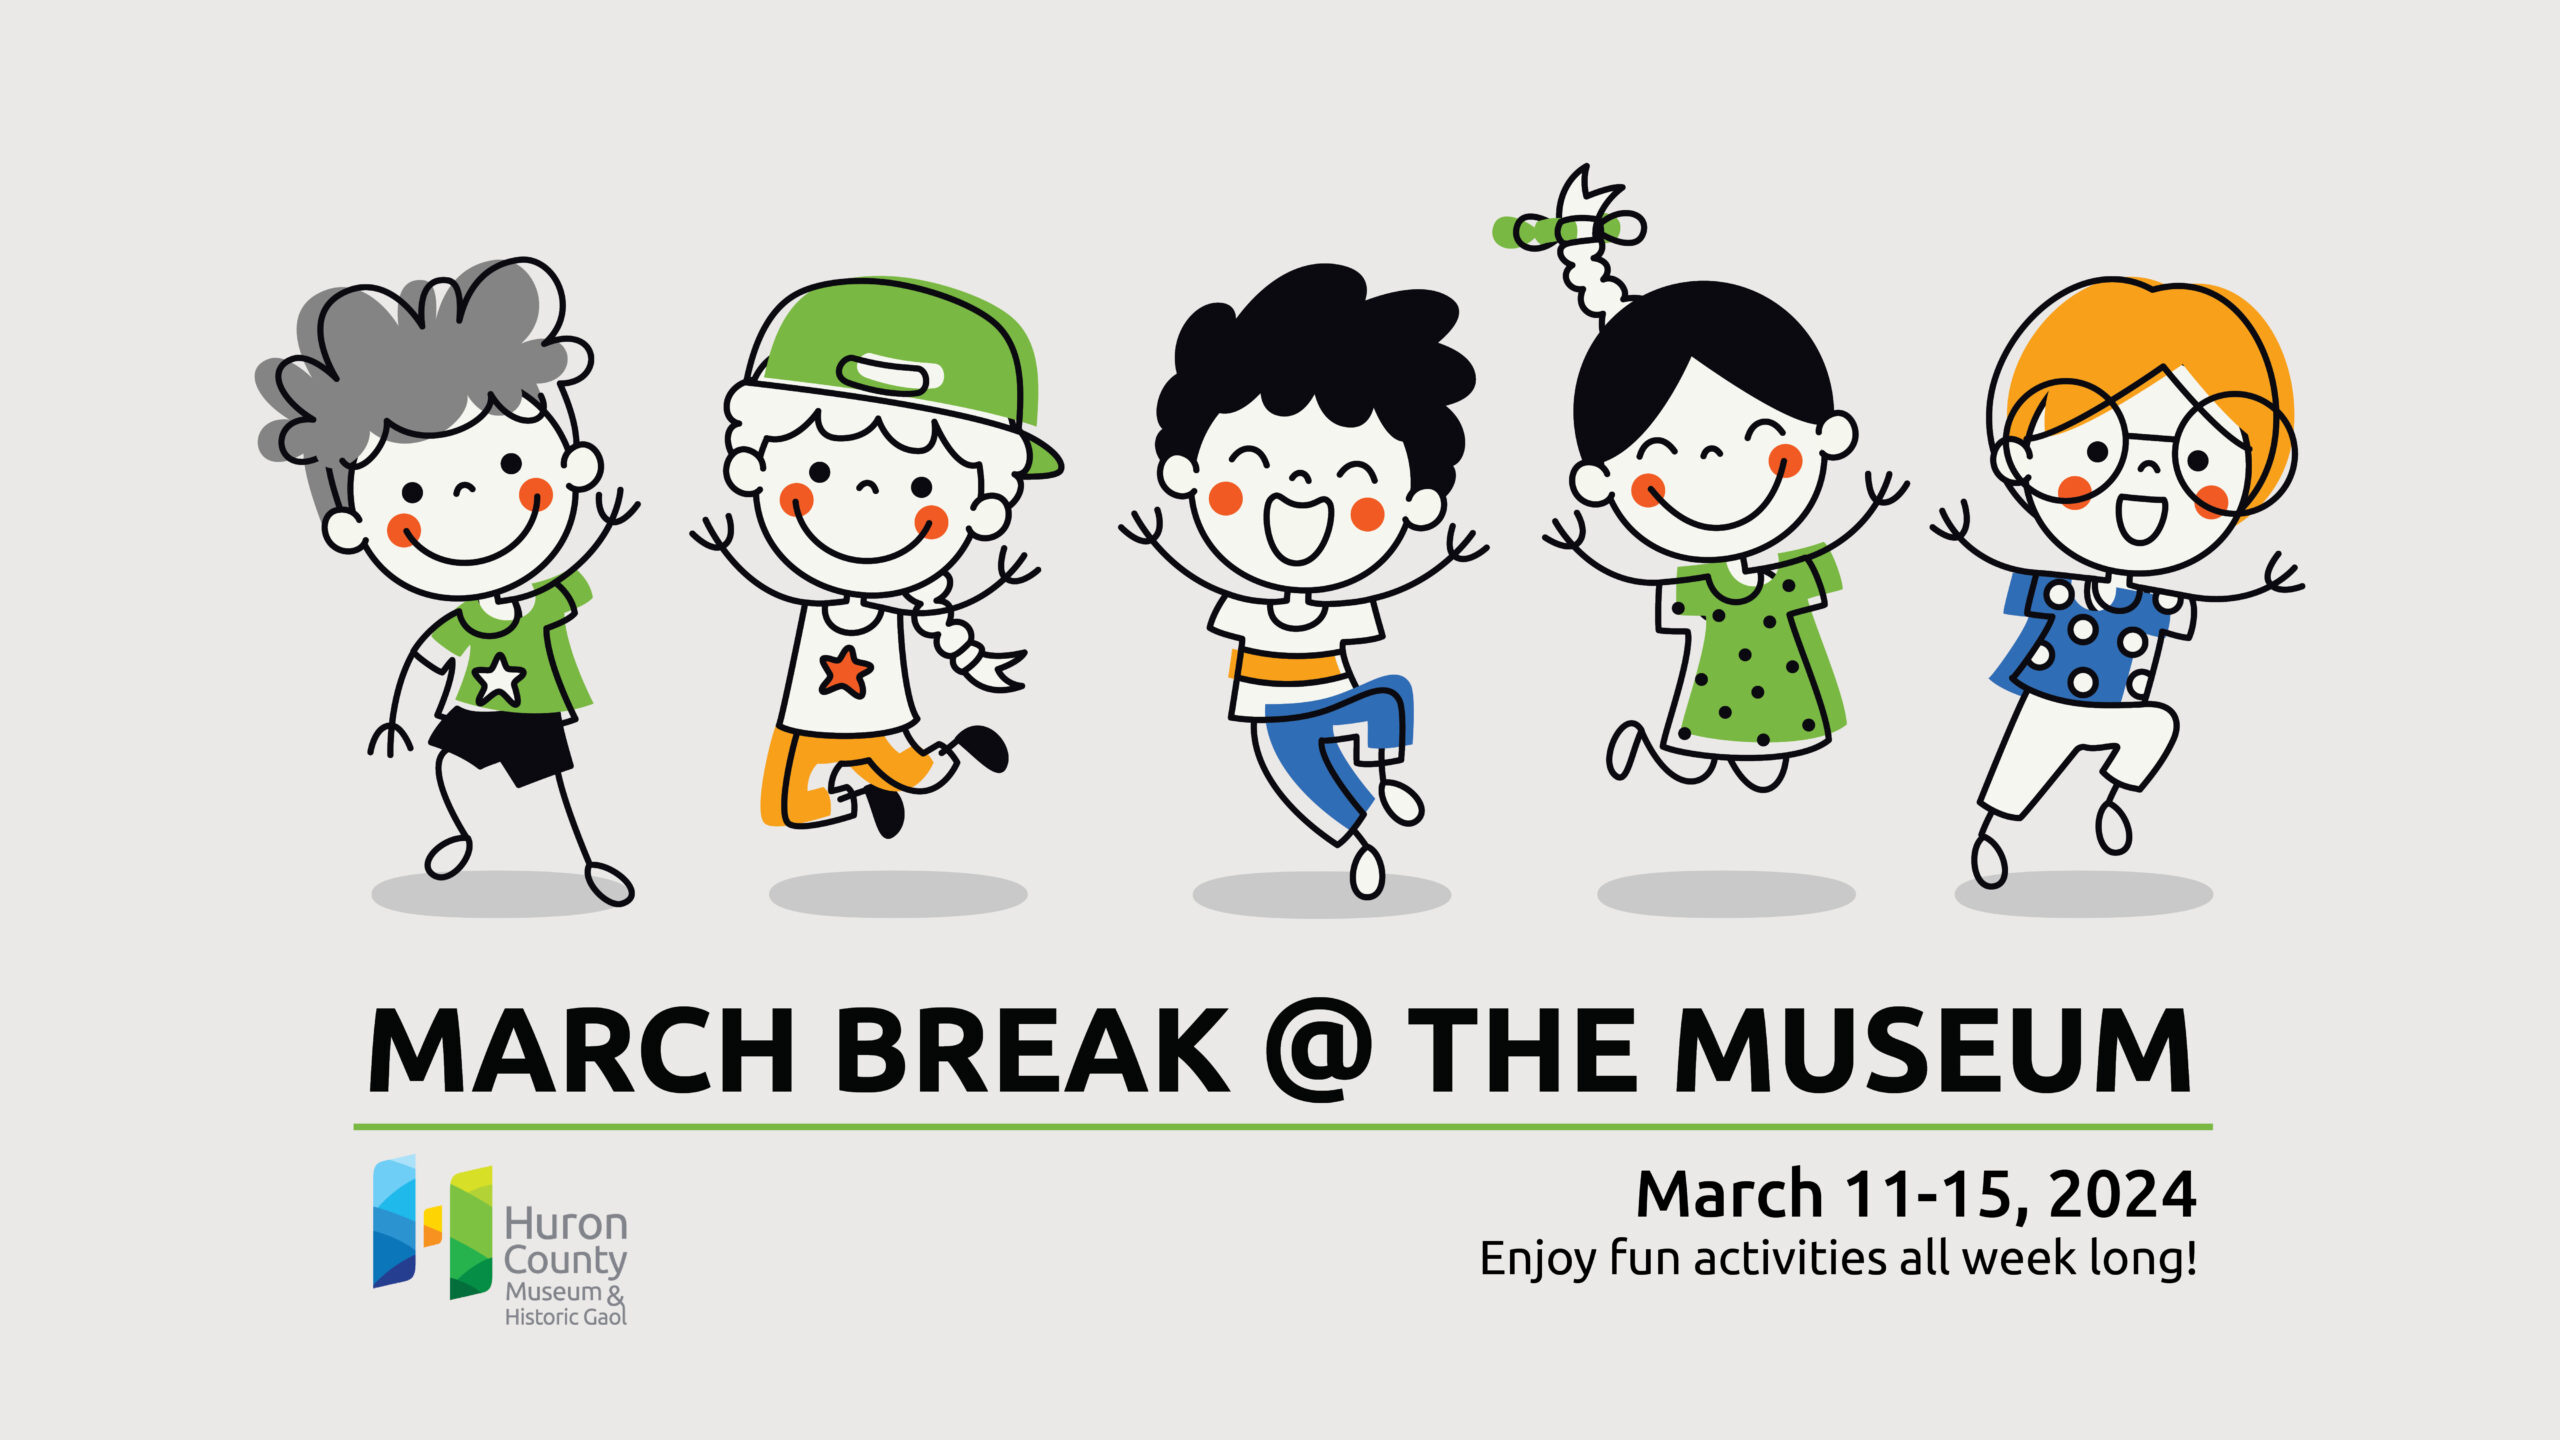 Illustration of five kids jumping in the air with text promoting March Break at the Museum